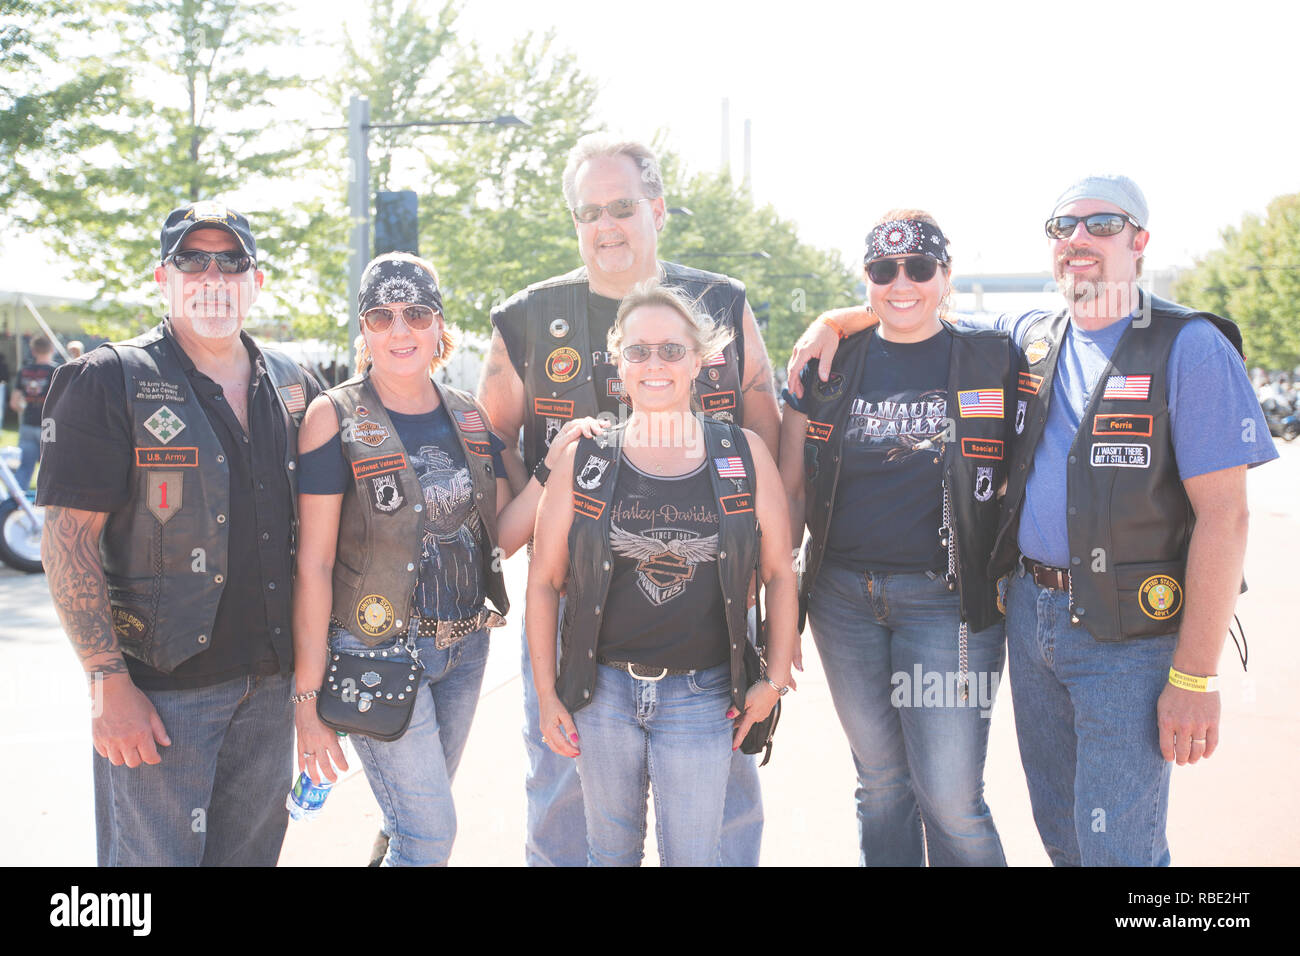 Motorcycle riders from all over the world attend the 115th Harley-Davidson anniversary celebration event at the Harley-Davidson Museum in Milwaukee, W Stock Photo